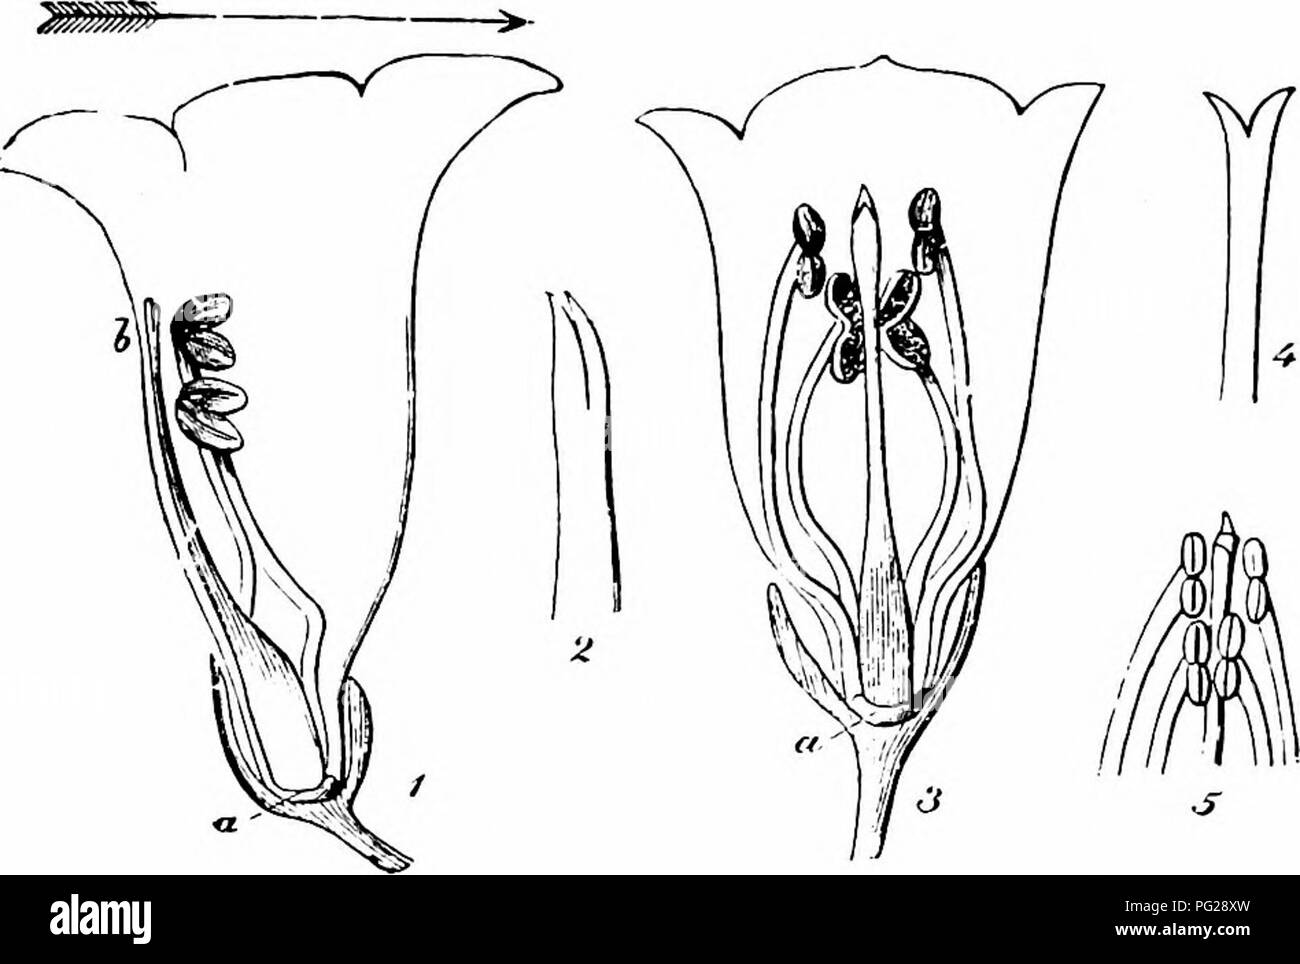 . Handbook of flower pollination : based upon Hermann Mu?ller's work 'The fertilisation of flowers by insects' . Fertilization of plants. l82 ANGIOSPERMAE—DICOTYLEDONES. Fig. 291. Digitalis purpurea, L. (after Henn. MUUer). (i) Young flower in which the anthers of the long stamens are dehiscing; seen from the right side after removal of half the calyx and corolla. To bring the figure into the natural position it must be supposed twisted round to the right till the arrow is vertical. (3) End of the style of do., enlarged; the stigmatic lobes are apposed. (3) Some- what older flower, seen from b Stock Photo